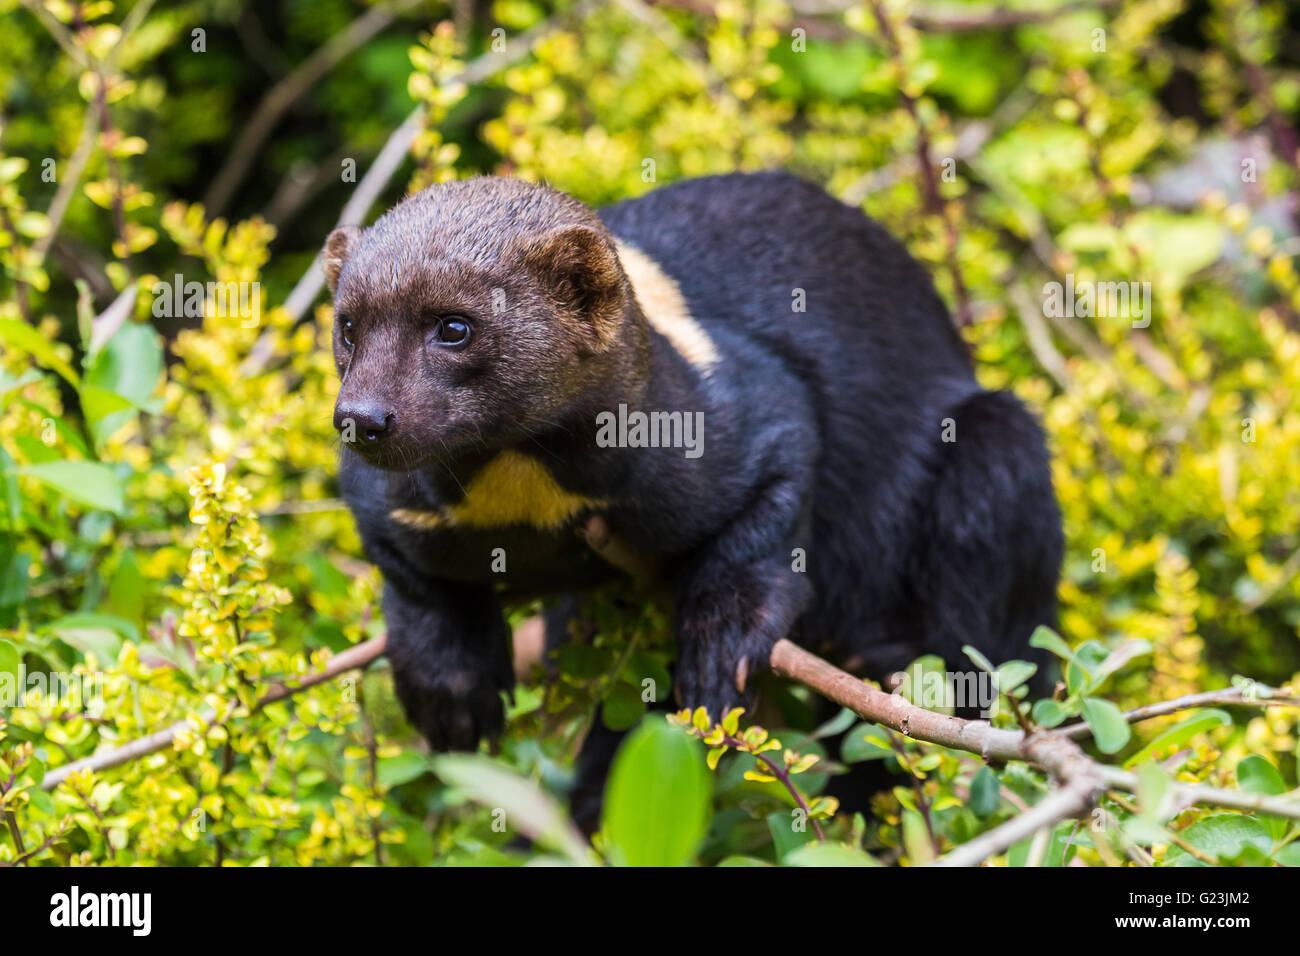 A Tayra (from the weasel family) lying on a branch of a large bush at the South Lakes Zoo in Cumbria. Stock Photo